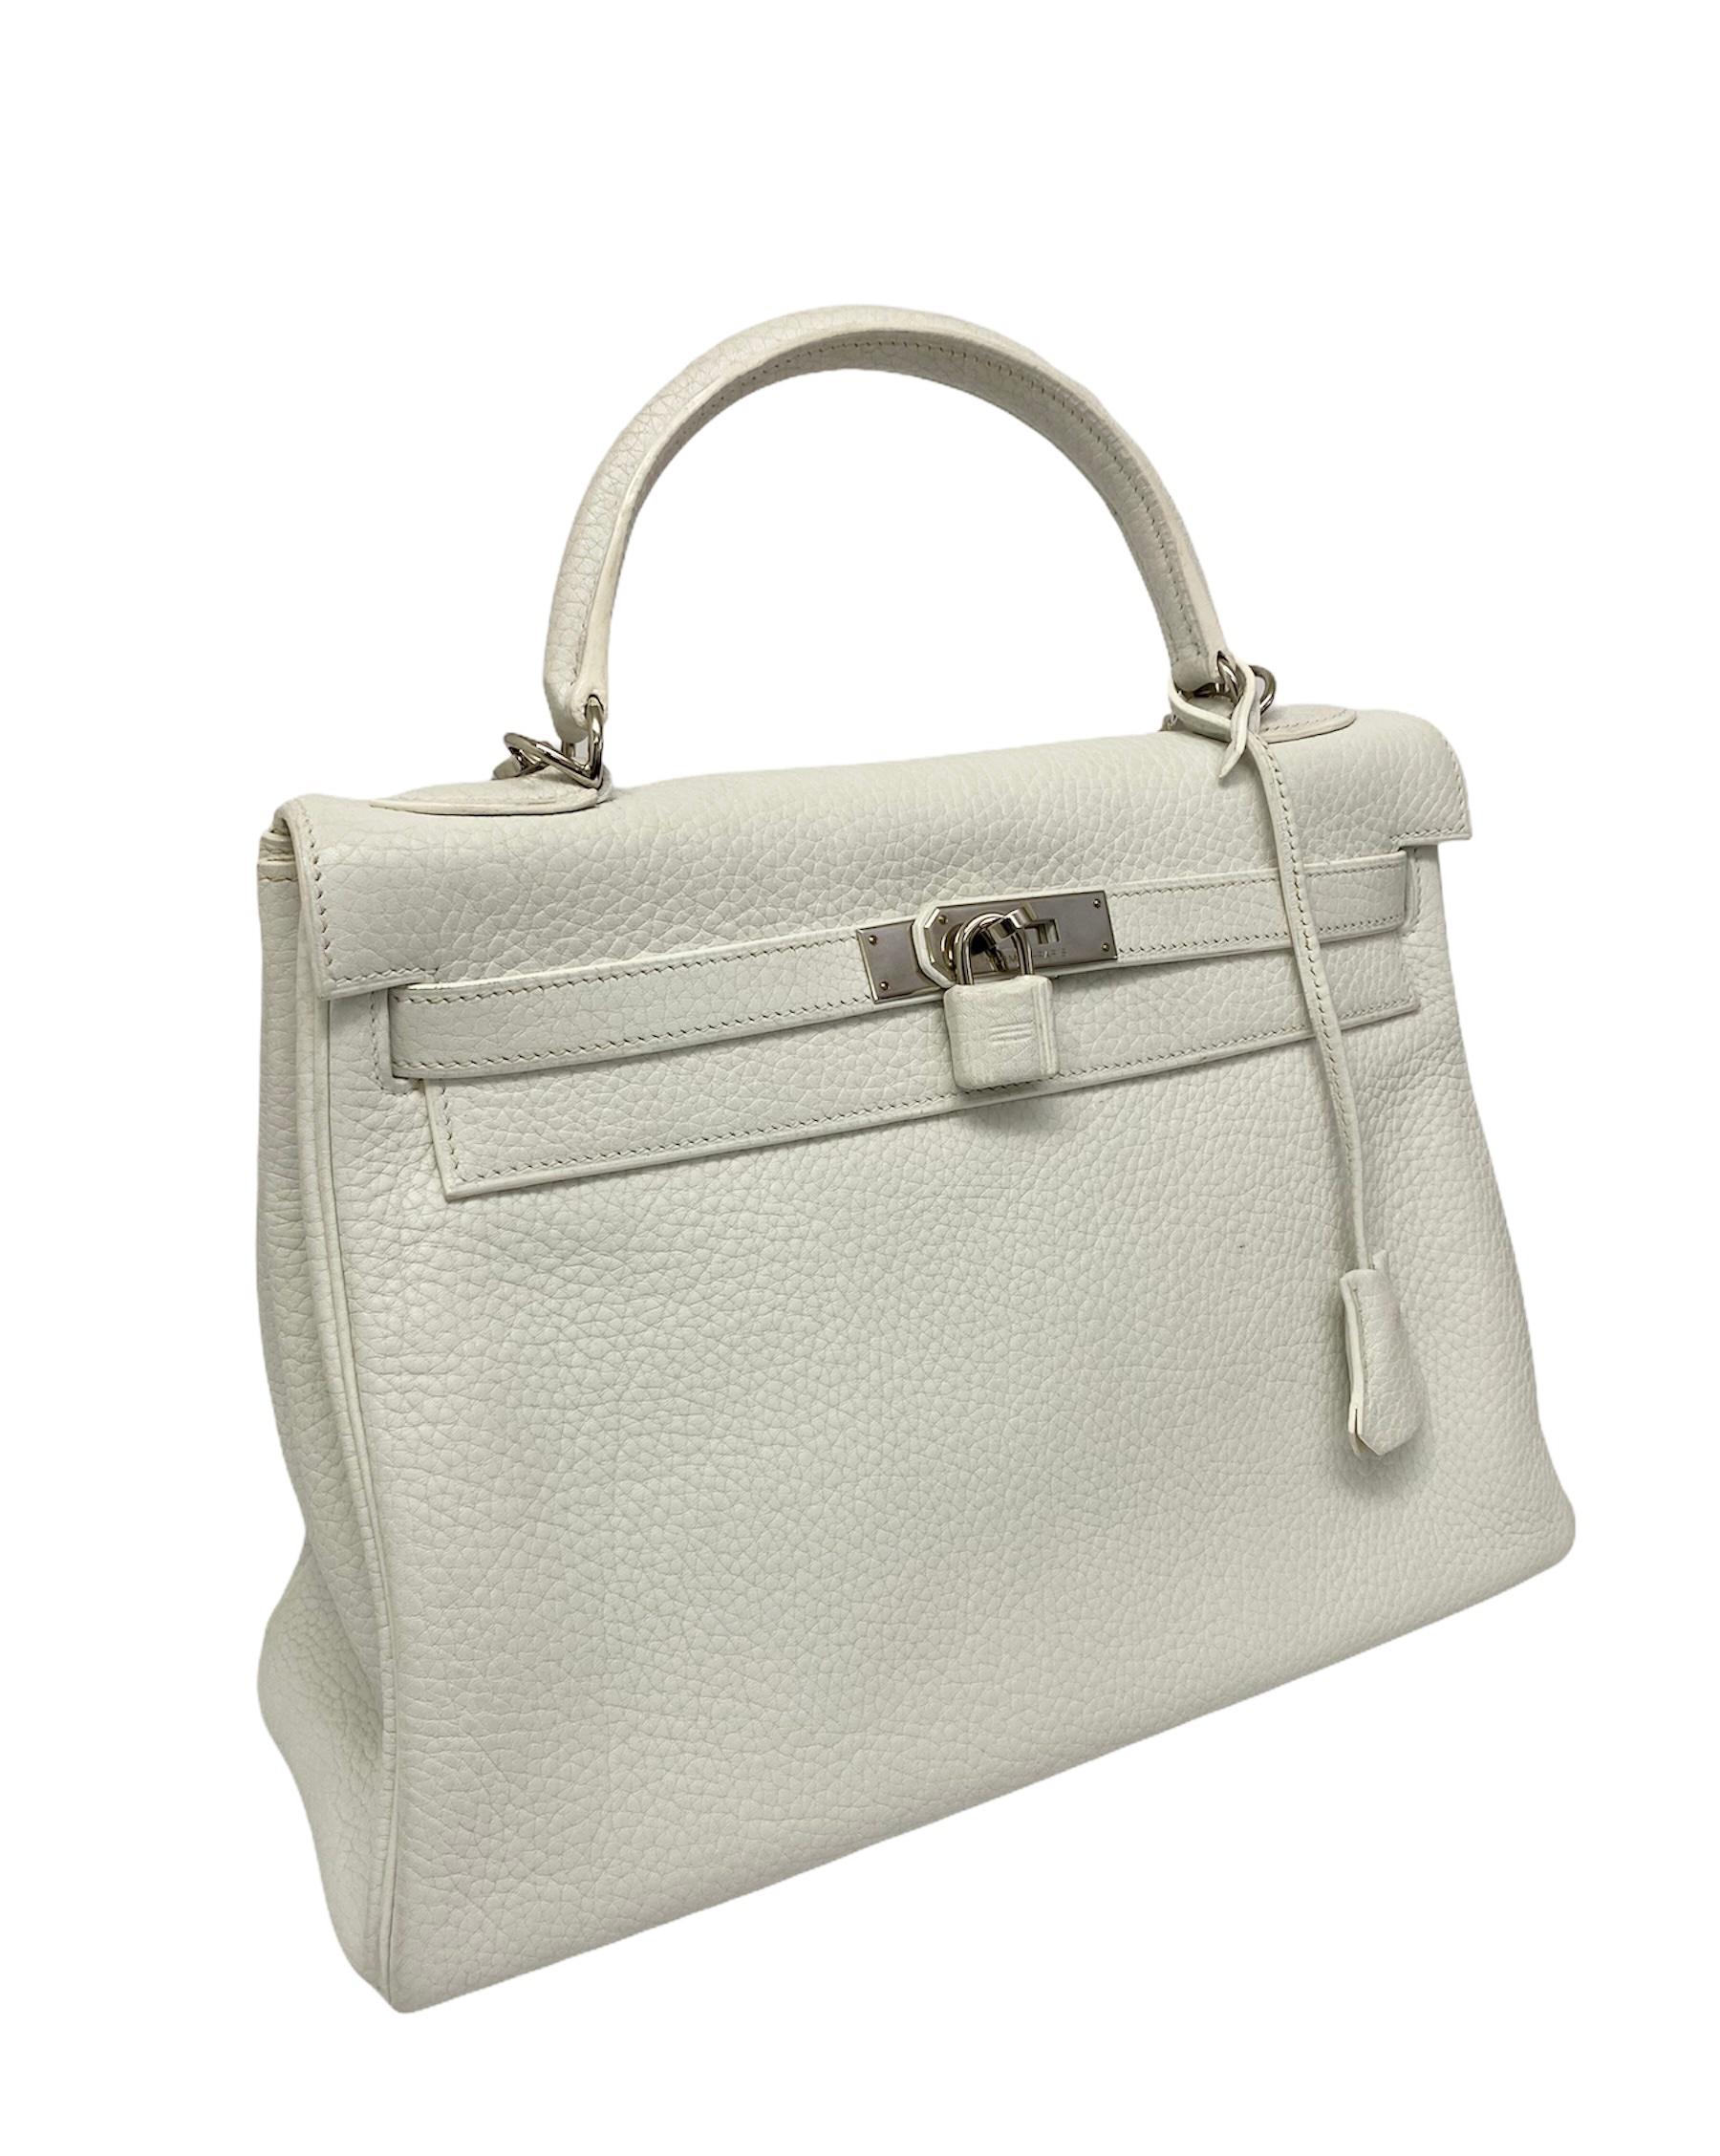 Hermès Kelly 32 model bag made of white togo with silver hardware. Closure with straps and personalized padlock. Equipped with leather handle and removable shoulder strap. Internally quite roomy, lined in leather and equipped with pockets. The bag